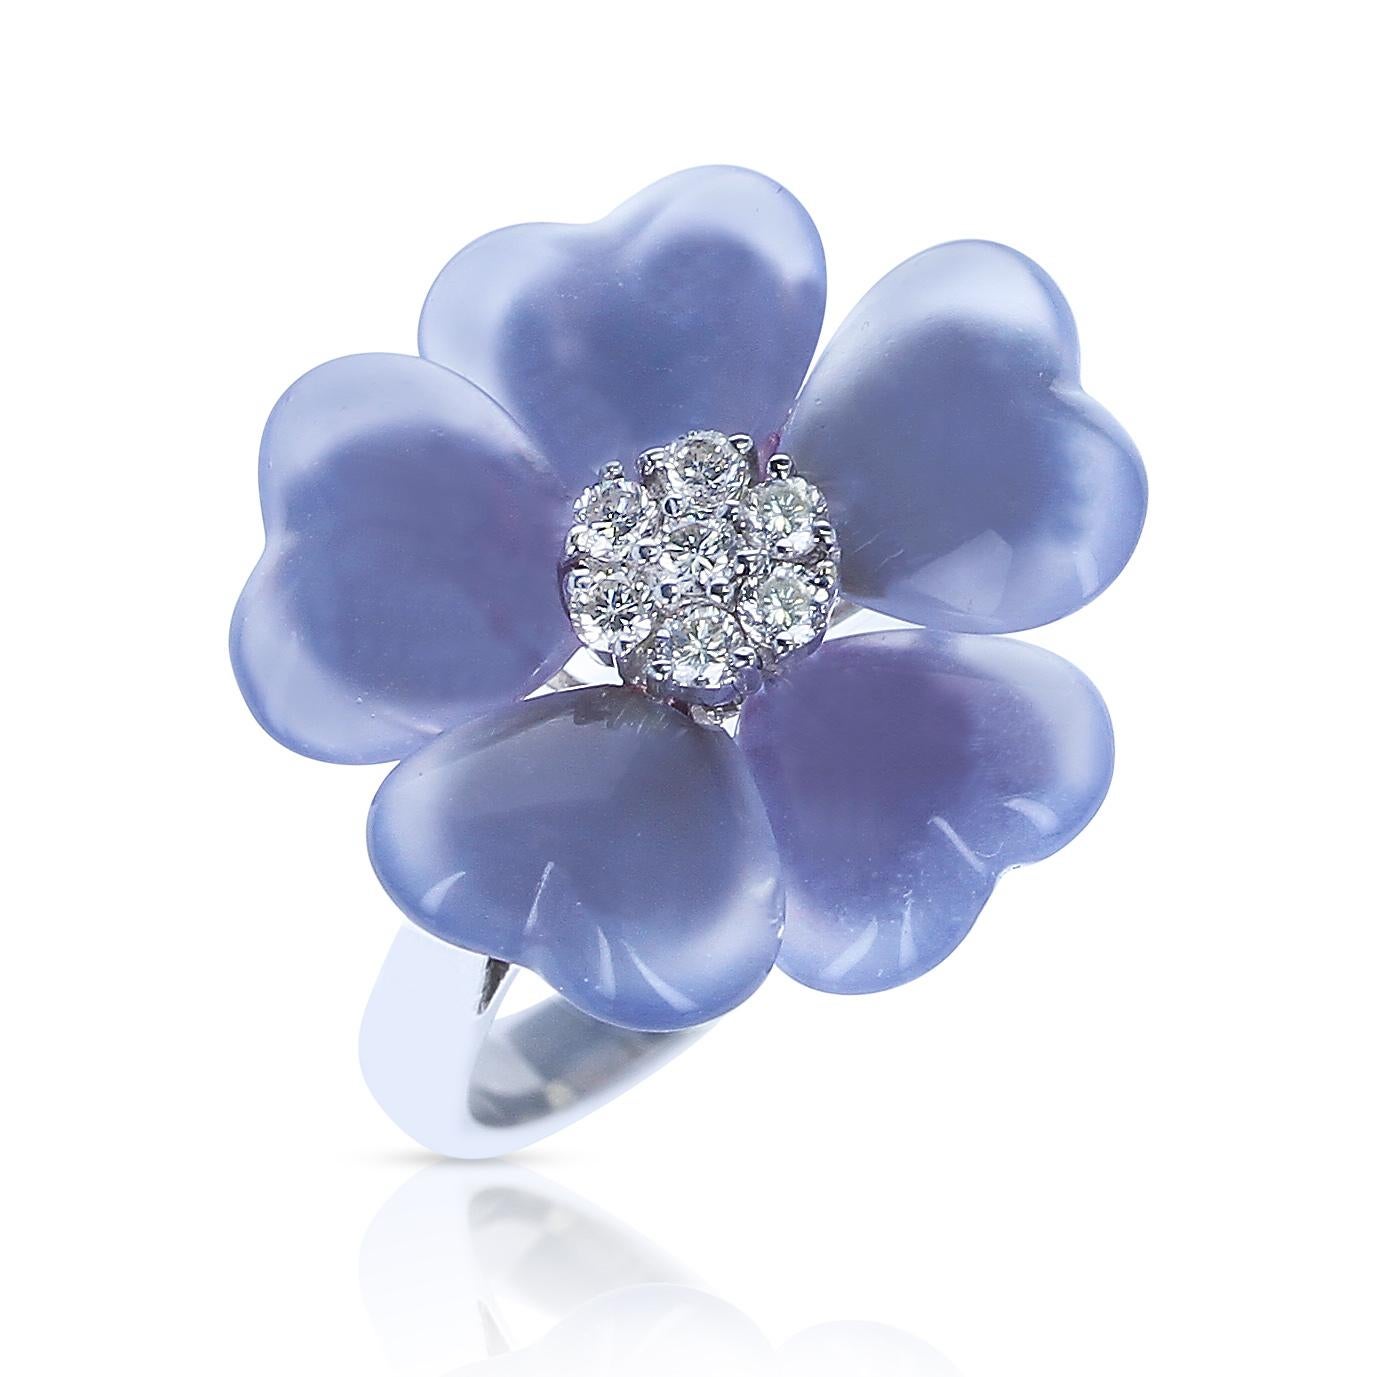 A Floral Chalcedony Ring with Seven Round-Diamonds made in 18 Karat White Gold. Total Weight 8.85 grams. Ring Size US 8. 